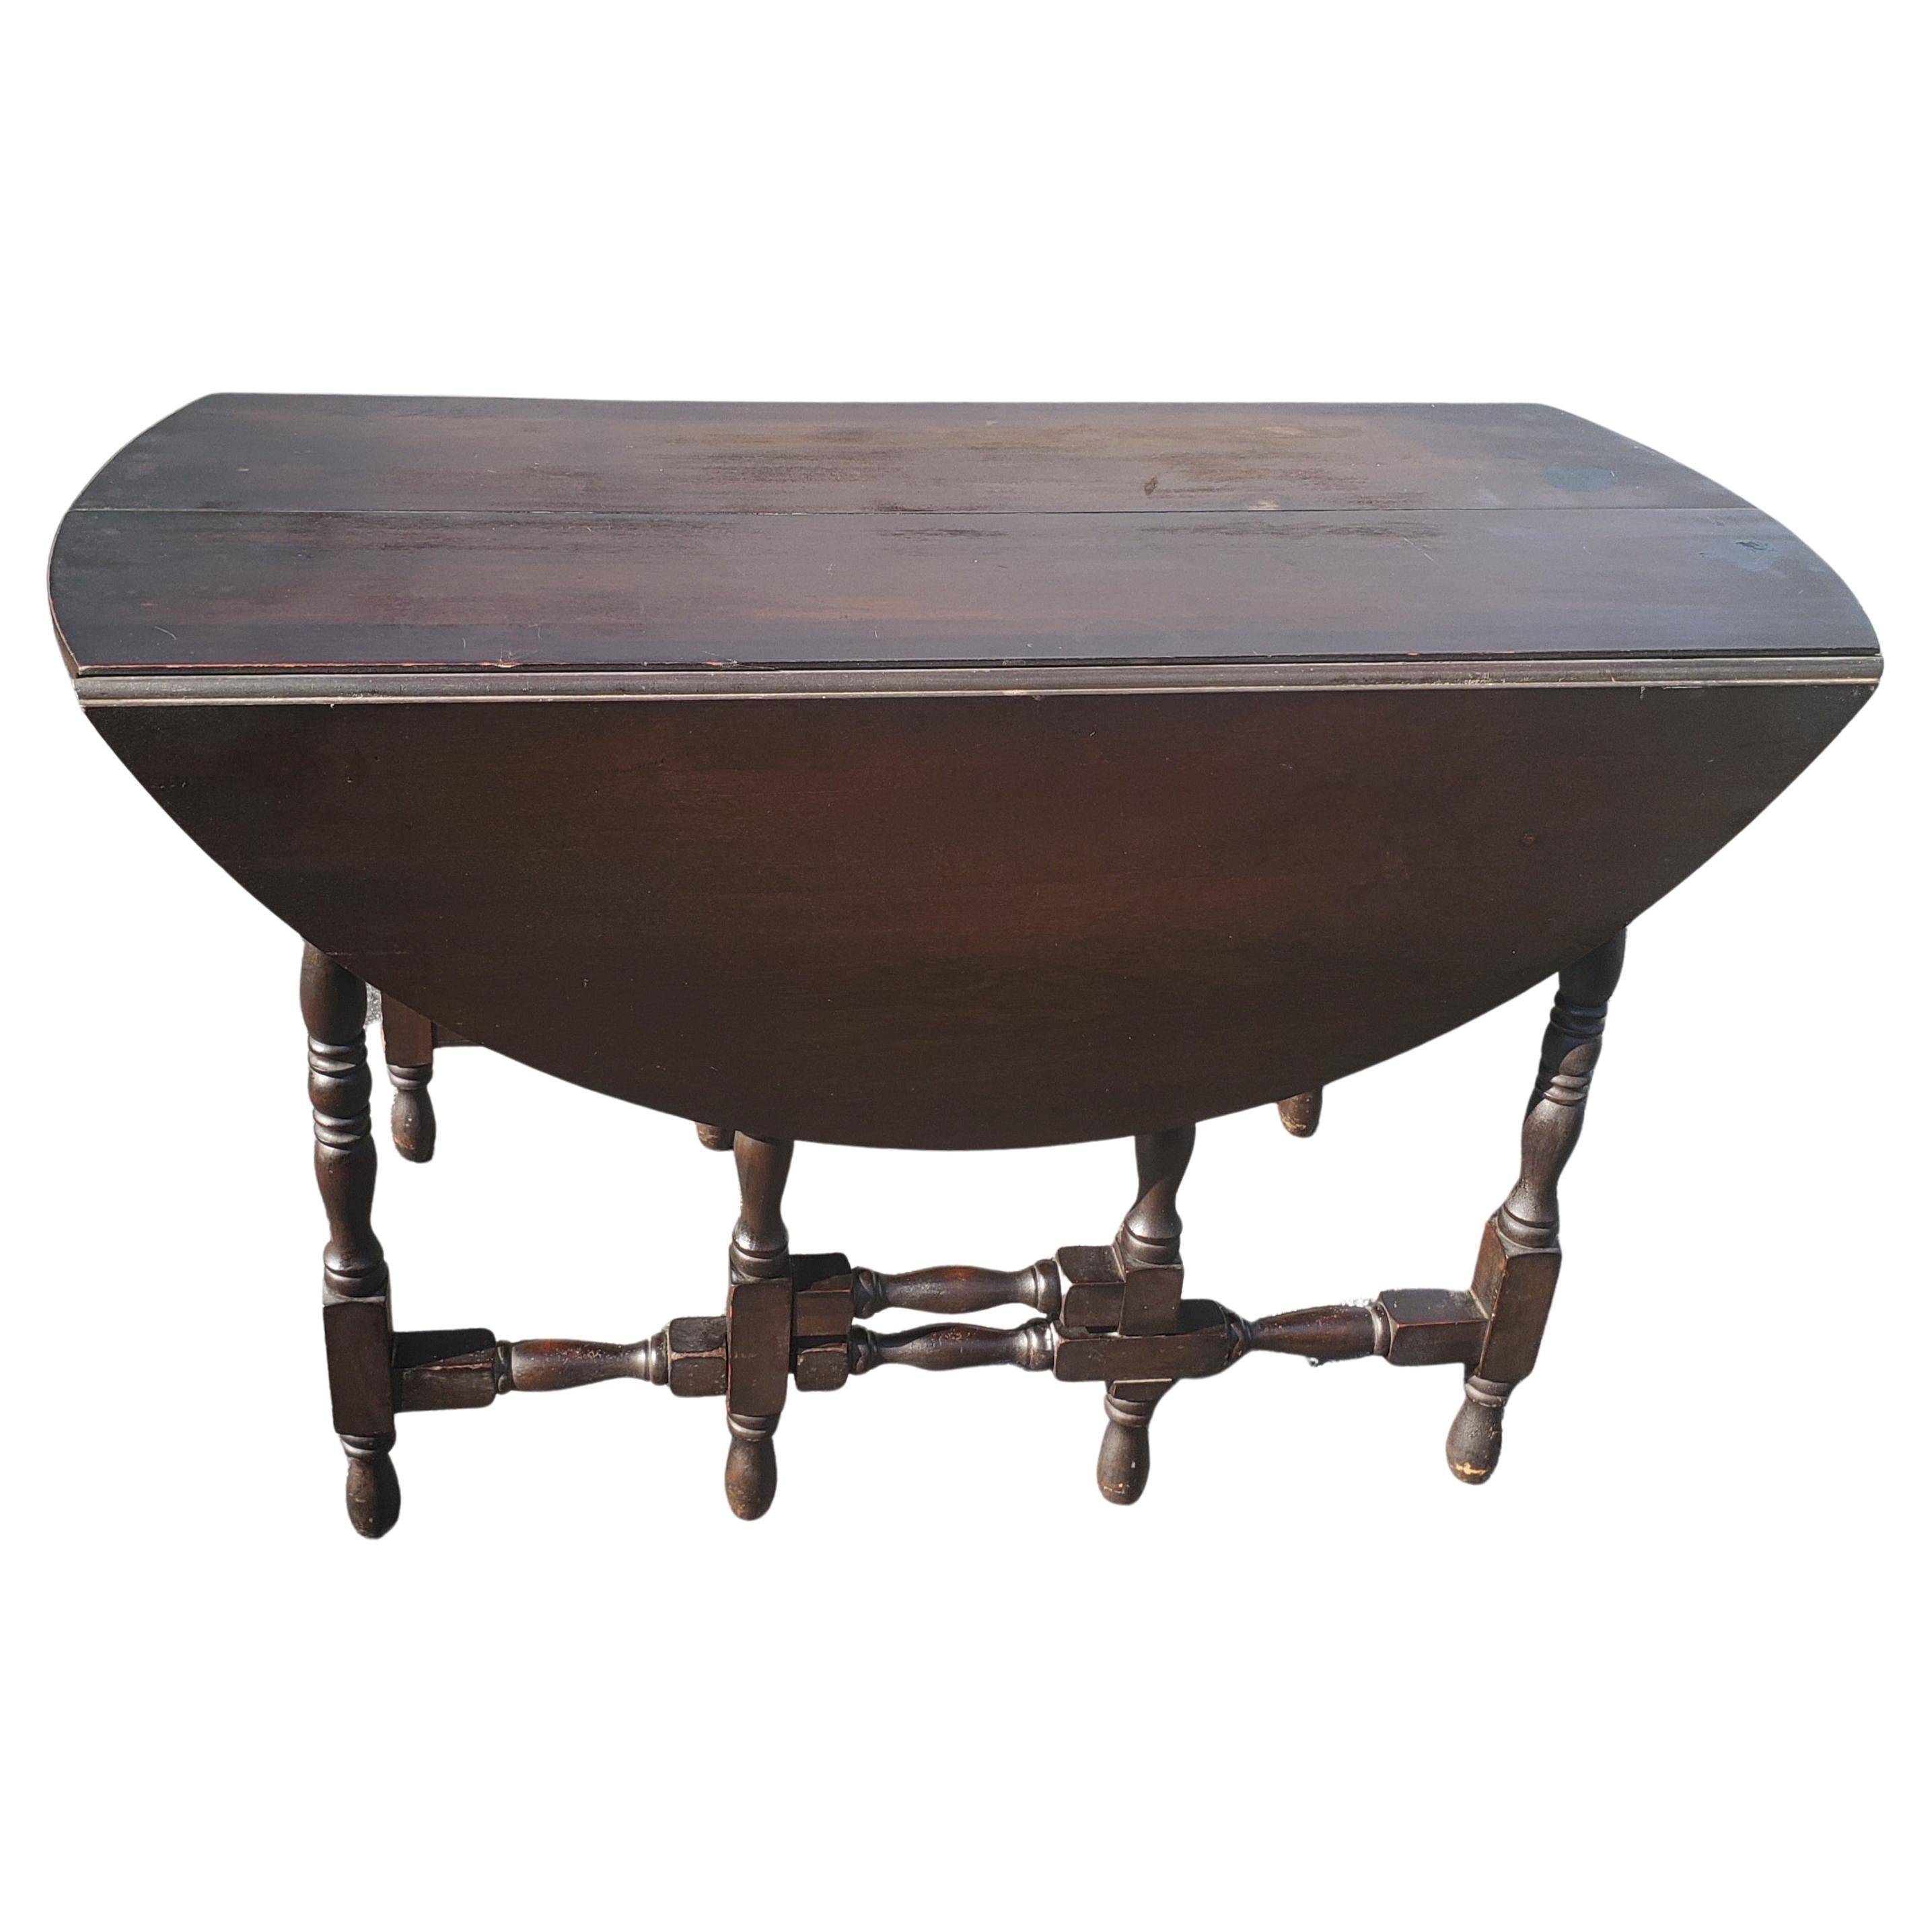 American 1920s Imperial Gateleg Dining Table